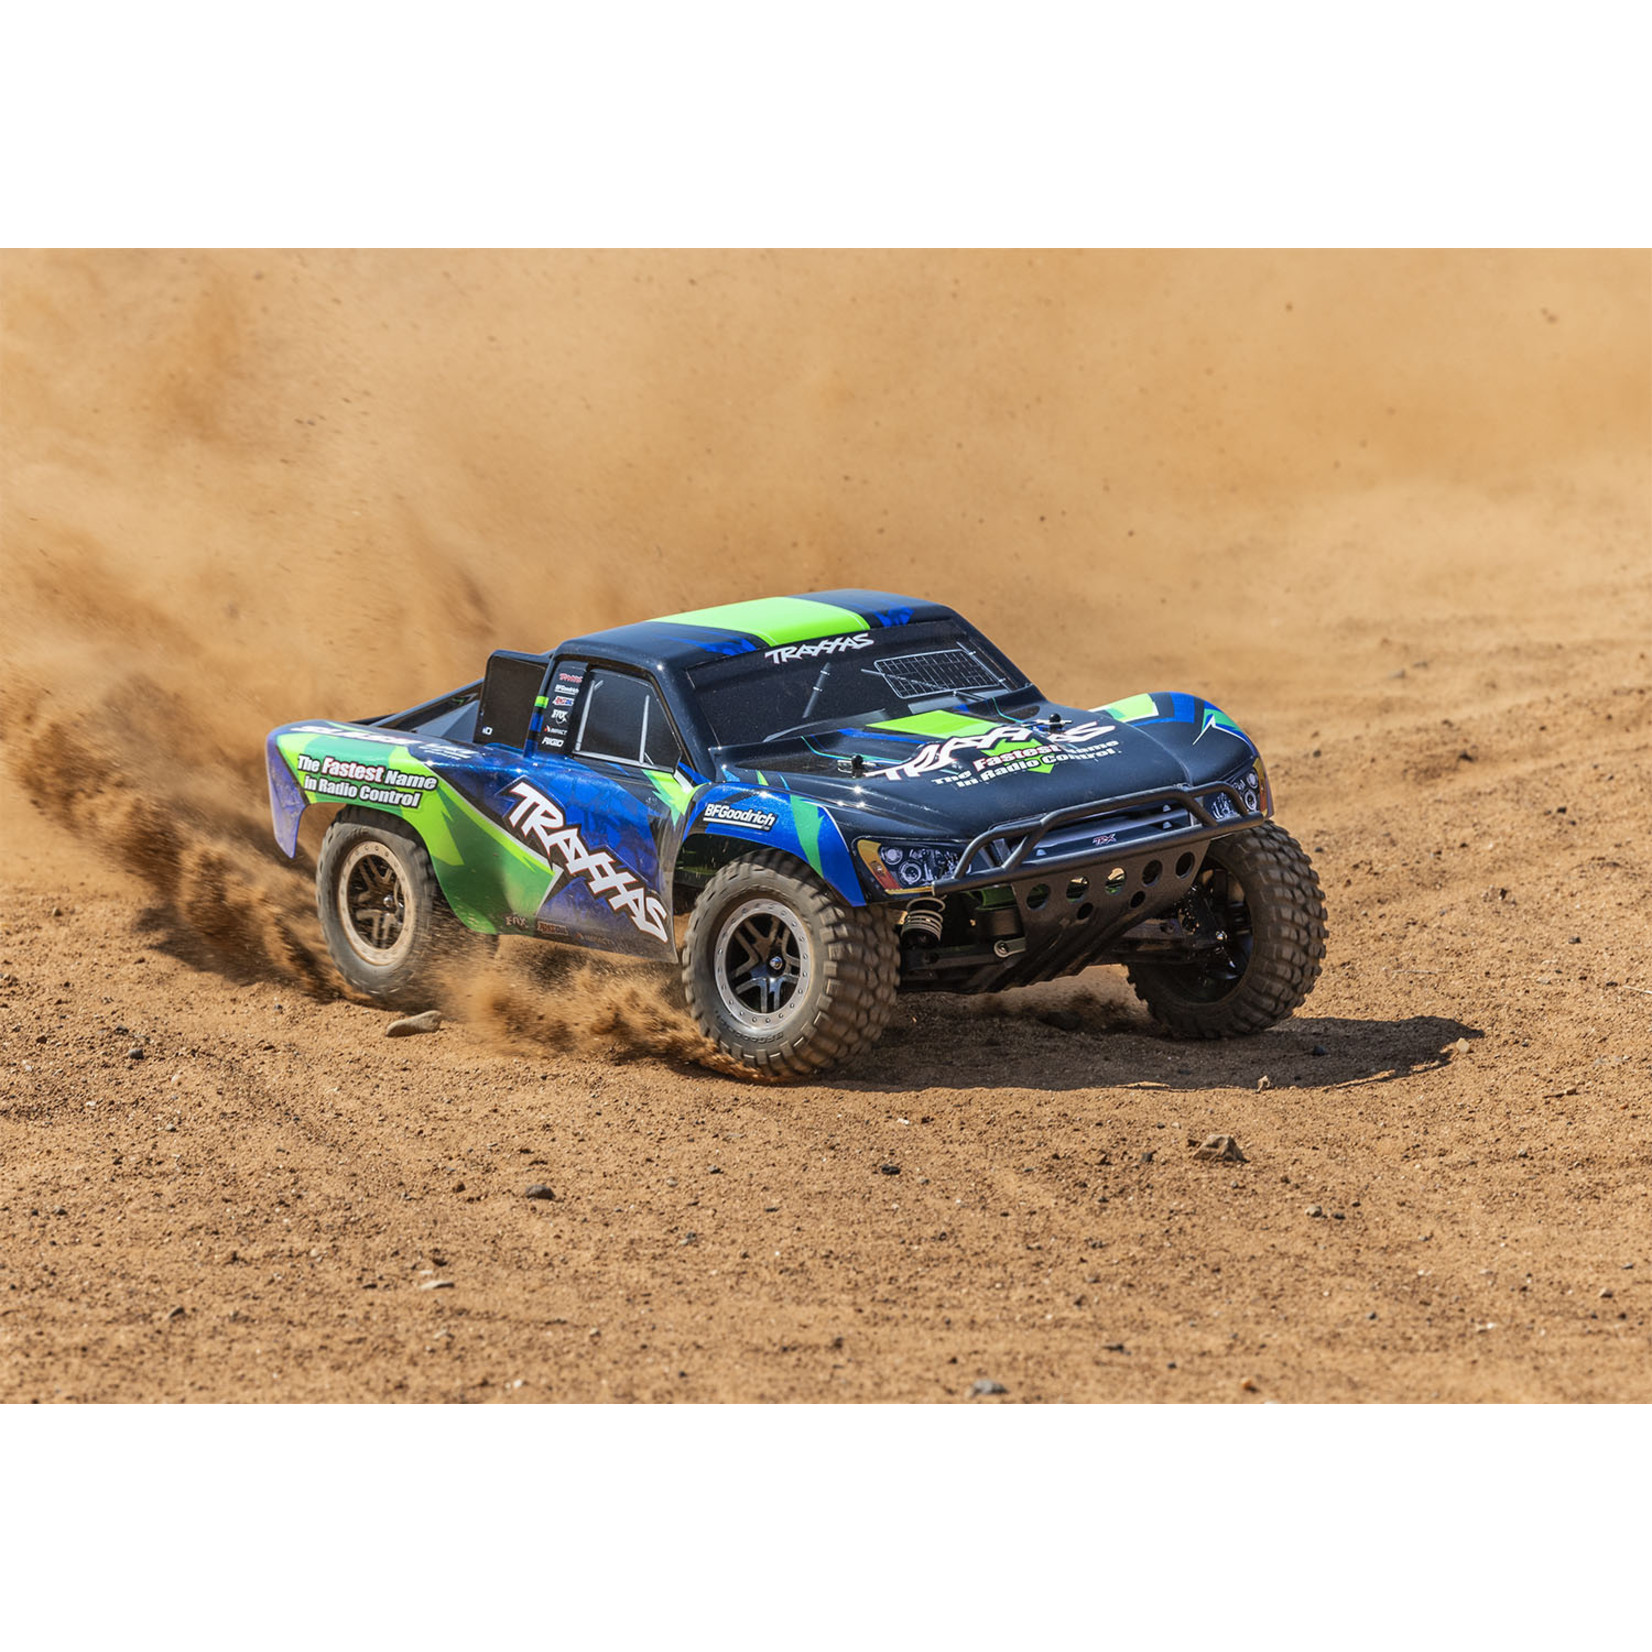 Traxxas Slash VXL:  1/10 Scale 2WD Brushless Short Course Racing Truck with Magnum 272R transmission & Traxxas Stability Management (TSM)